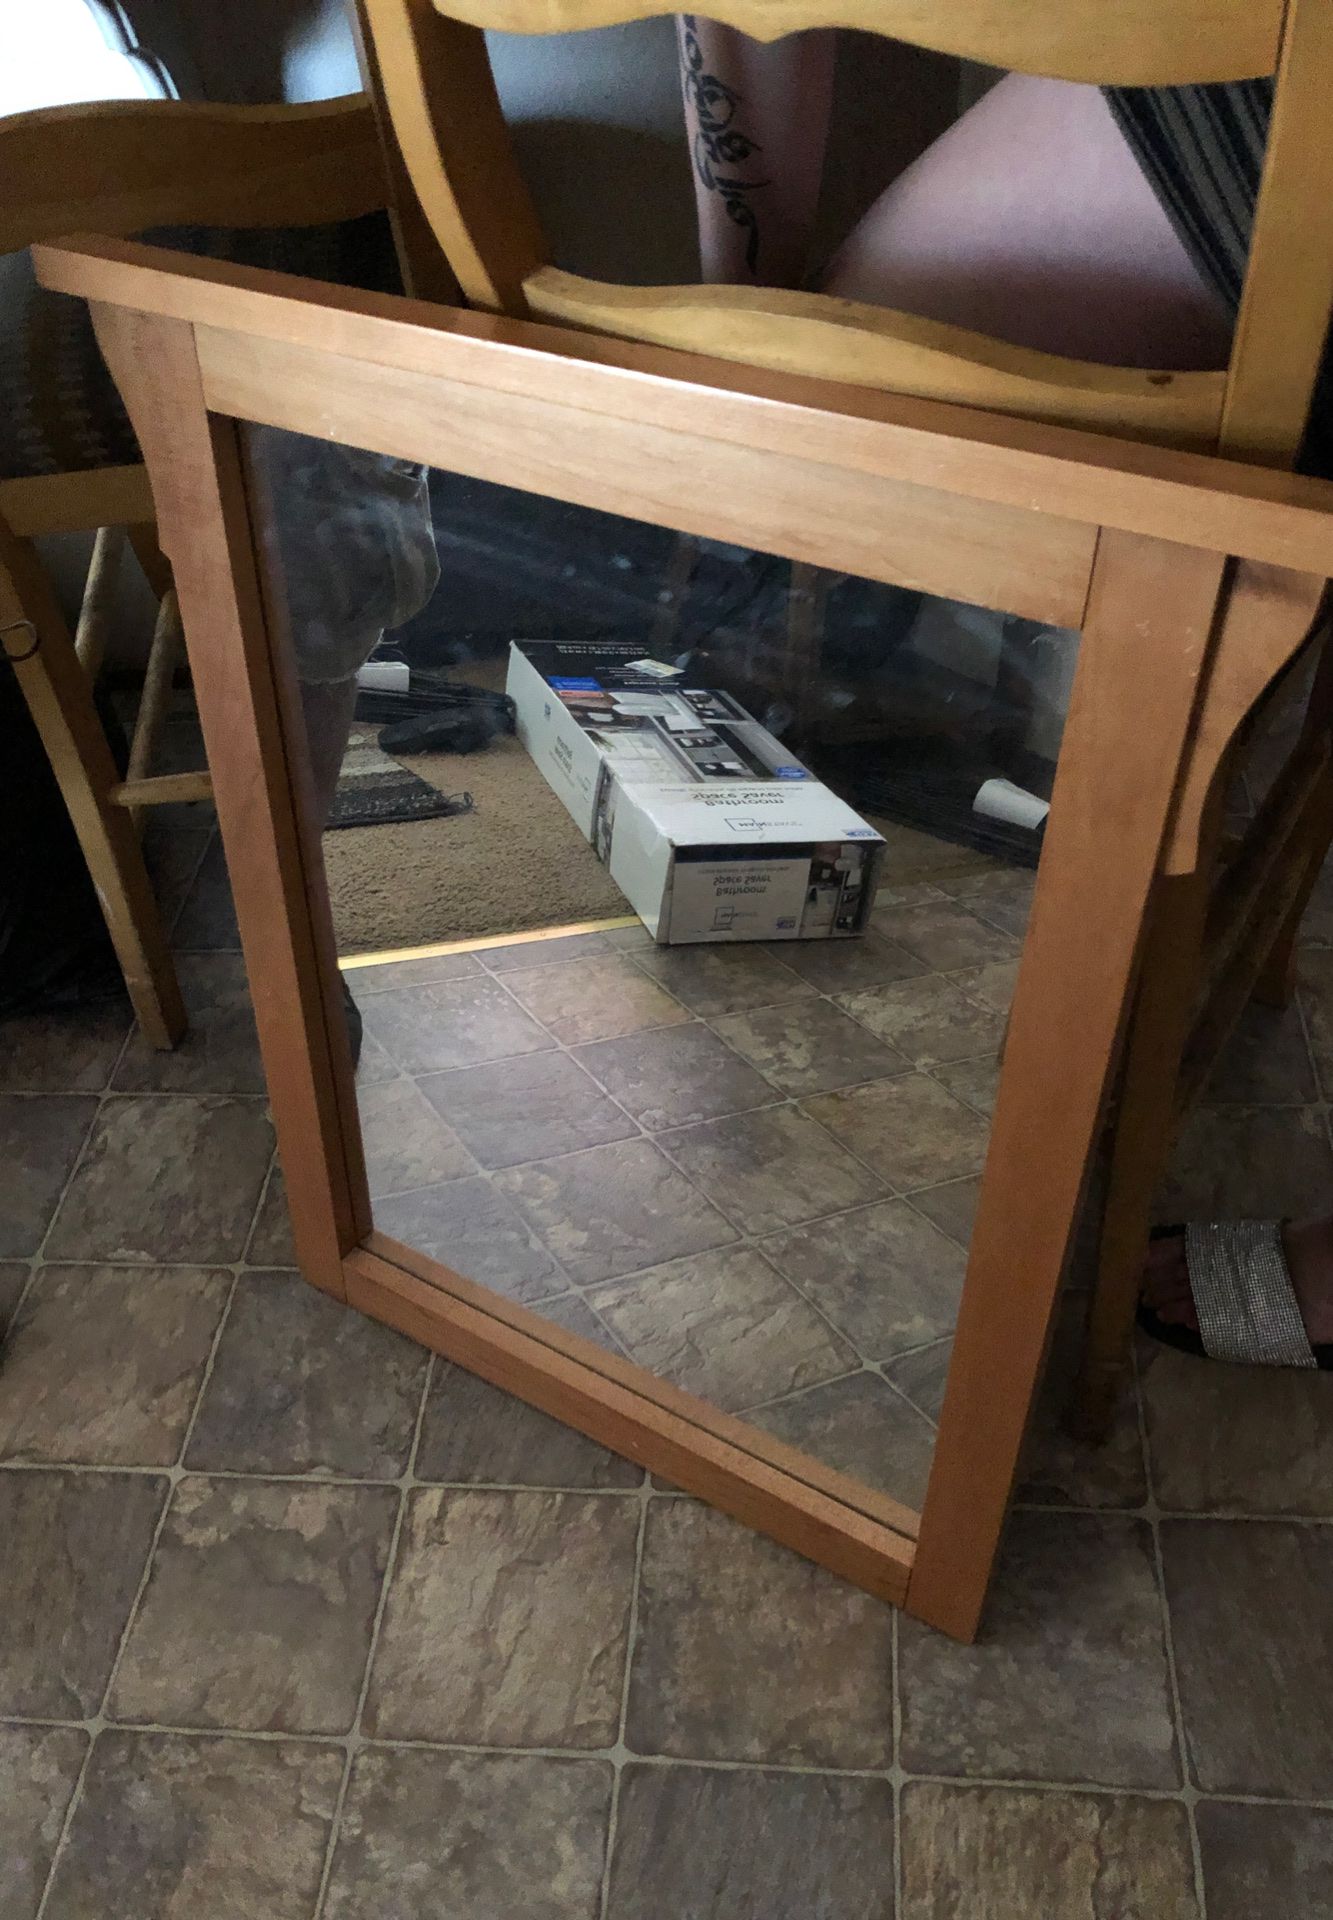 32 x 24 wall with mirror good condition normal wear and tear some scratches